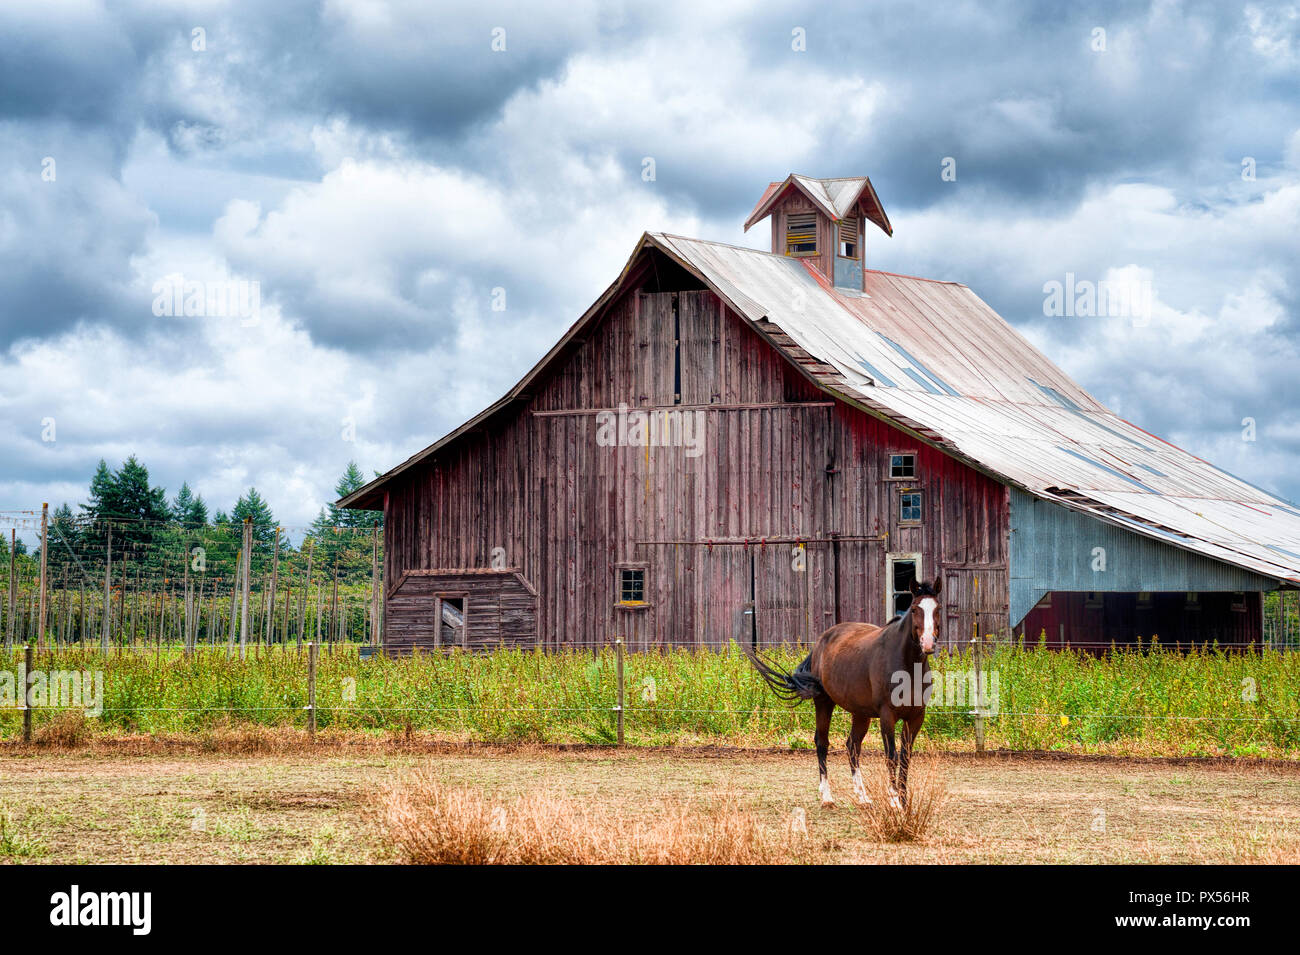 Horse stands in front of a barn under threatening rain heavy clouds. Stock Photo